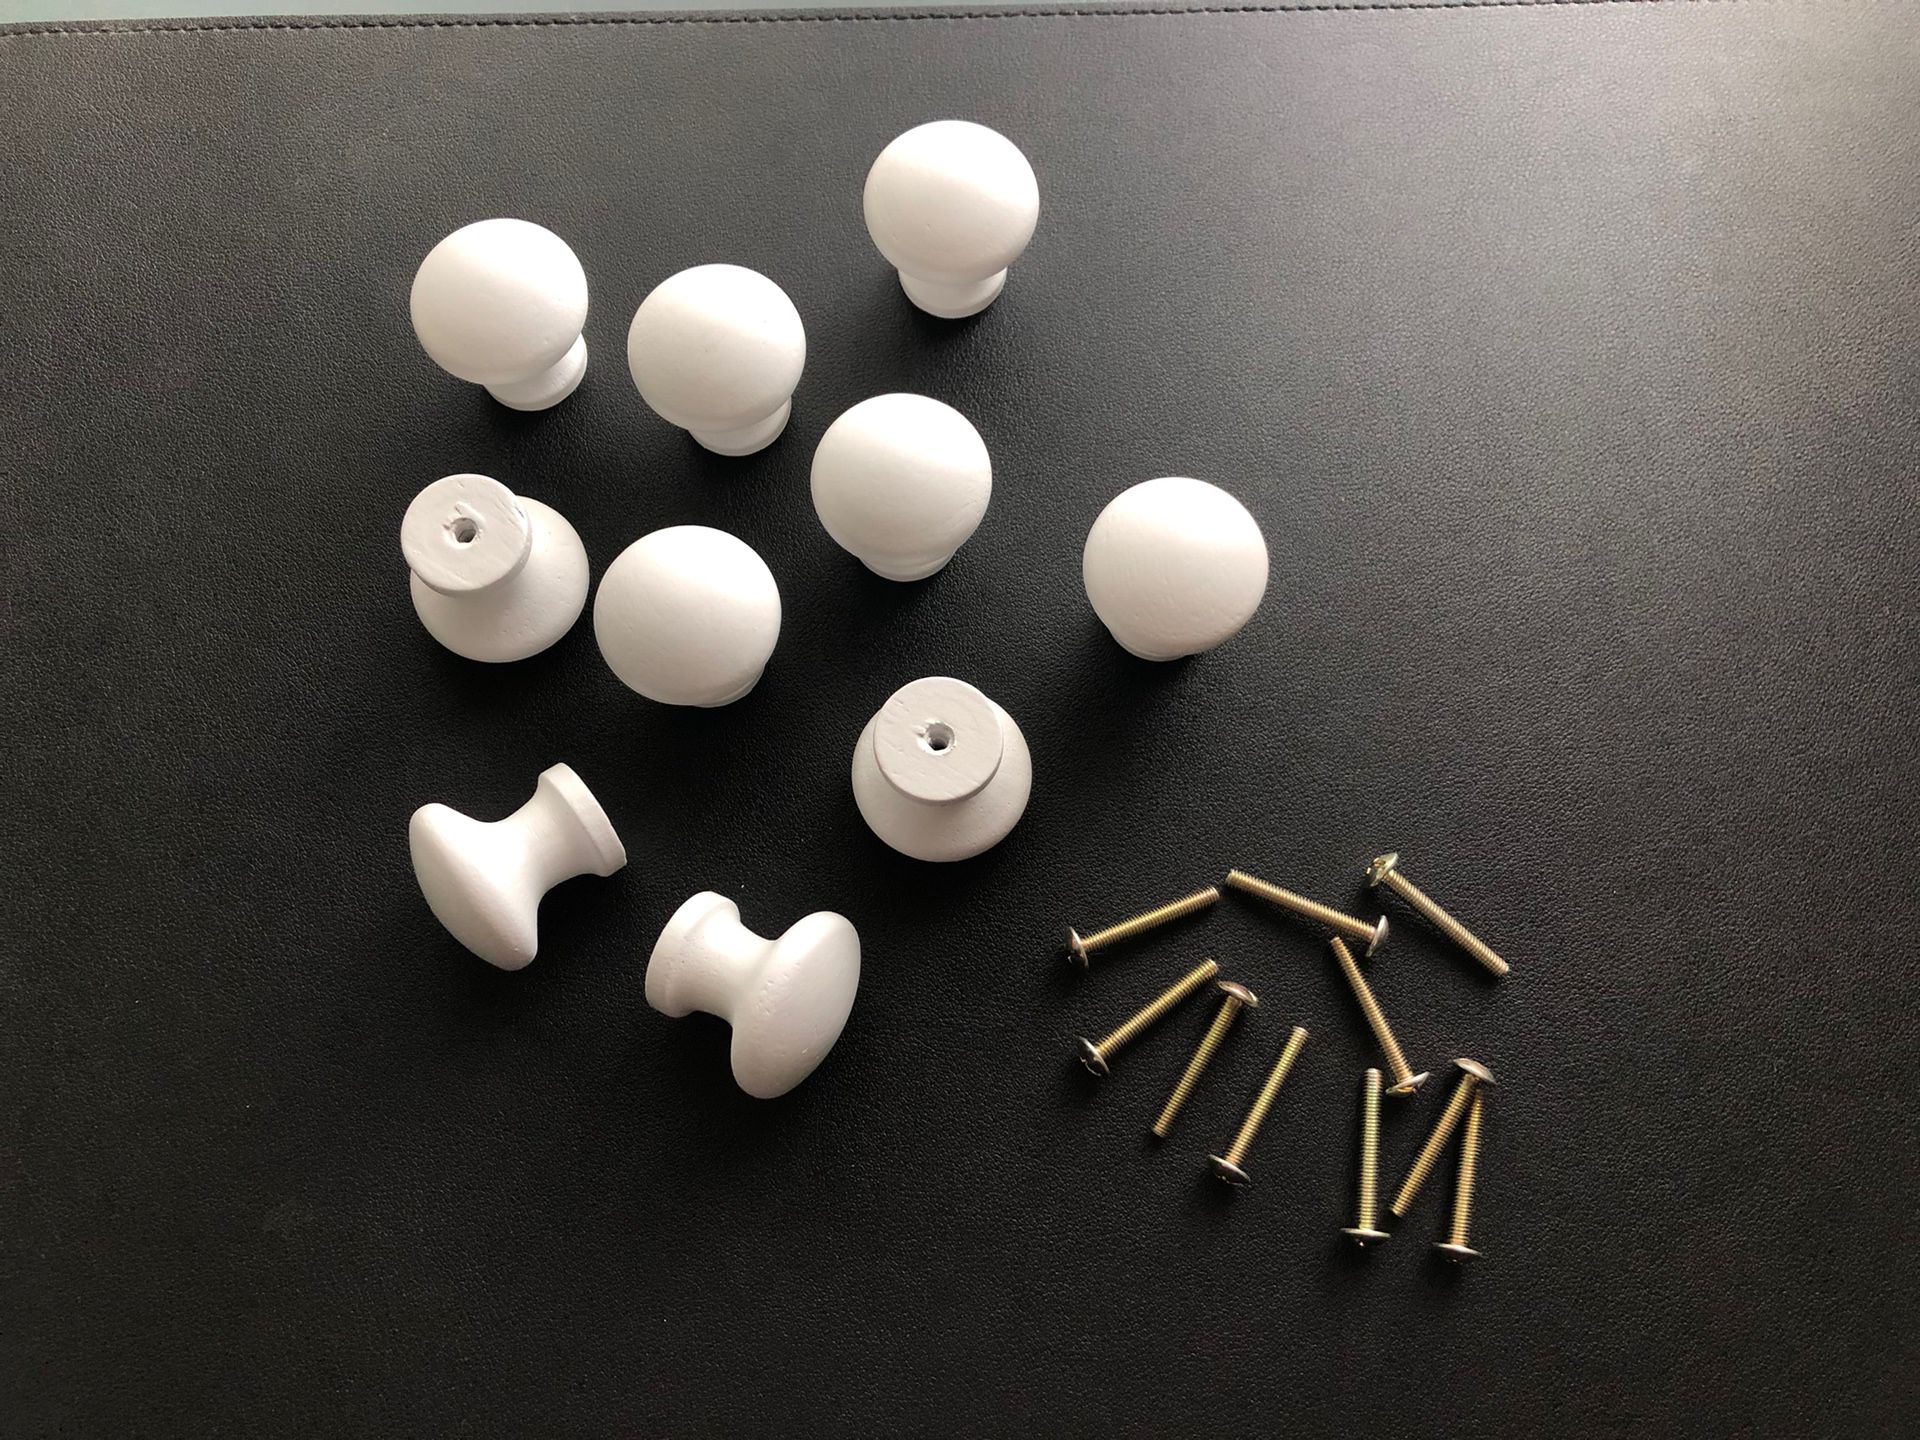 10 White Wooden Dresser Knobs. New condition. Roughly 1 1/2” W/ Hardware